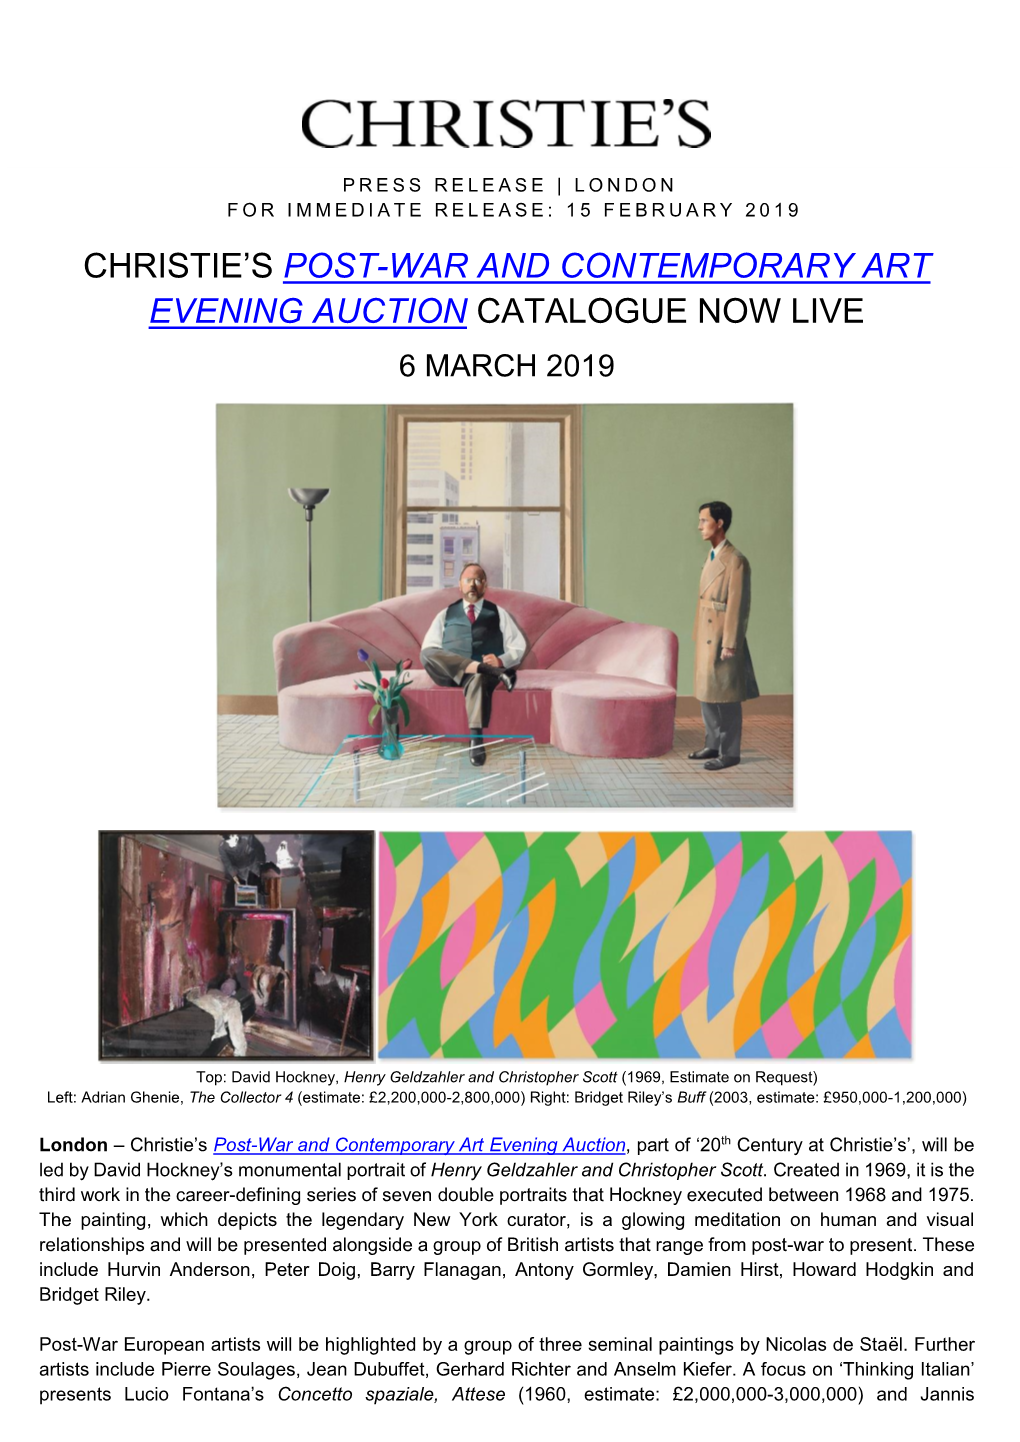 Christie's Post-War and Contemporary Art Evening Auction Catalogue Now Live